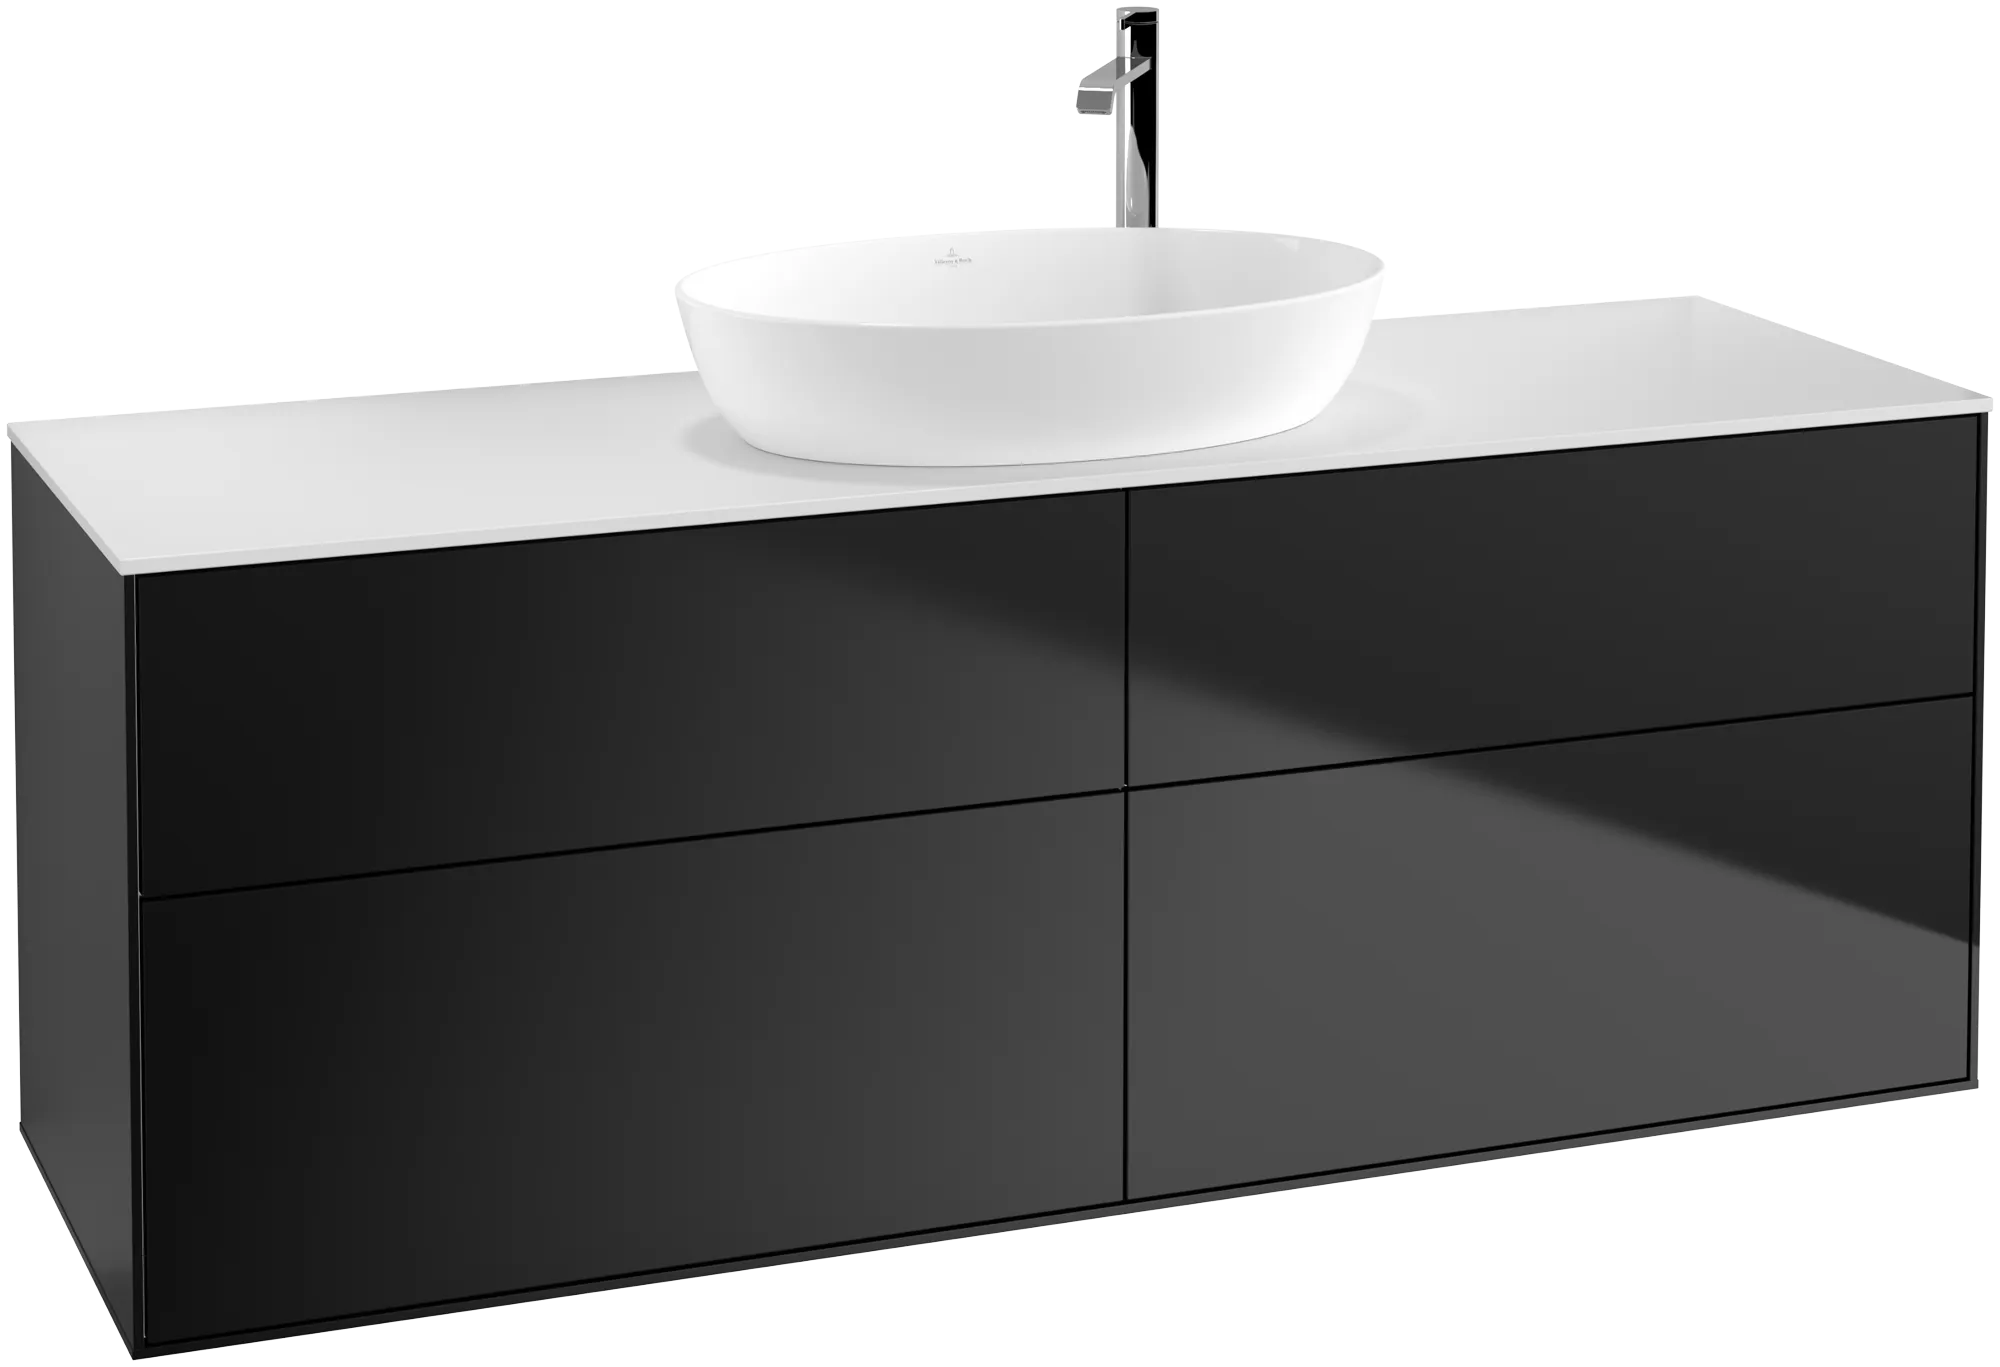 Picture of VILLEROY BOCH Finion Vanity unit, with lighting, 4 pull-out compartments, 1600 x 603 x 501 mm, Black Matt Lacquer / Glass White Matt #G97100PD